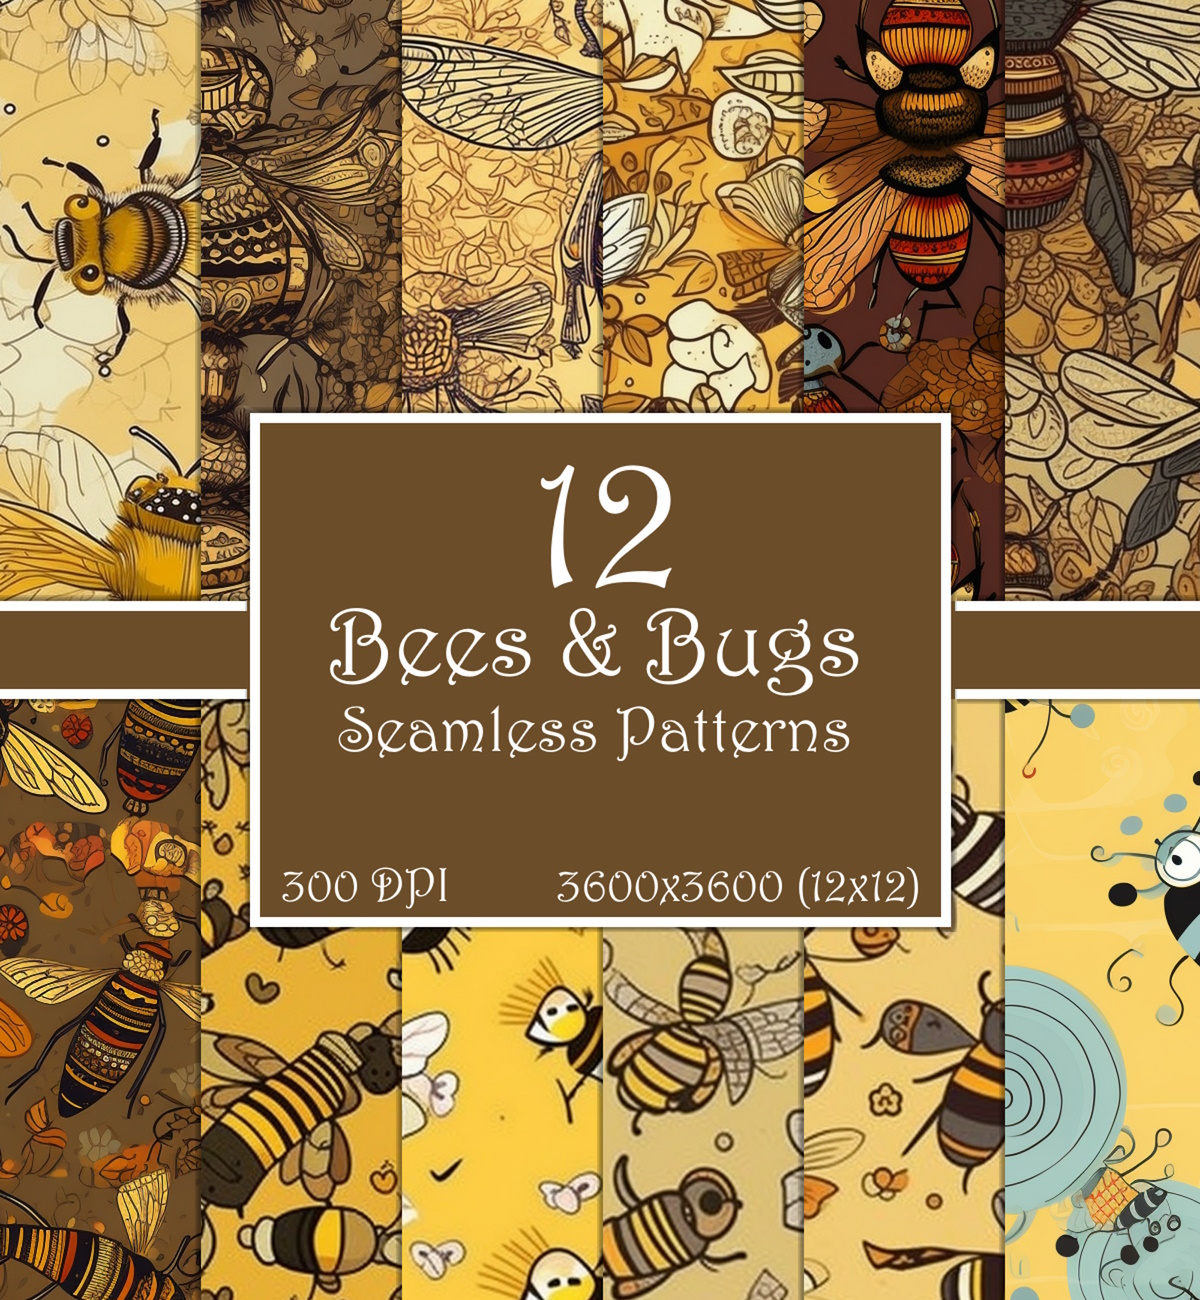 Bees & Bugs Seamless Patterns